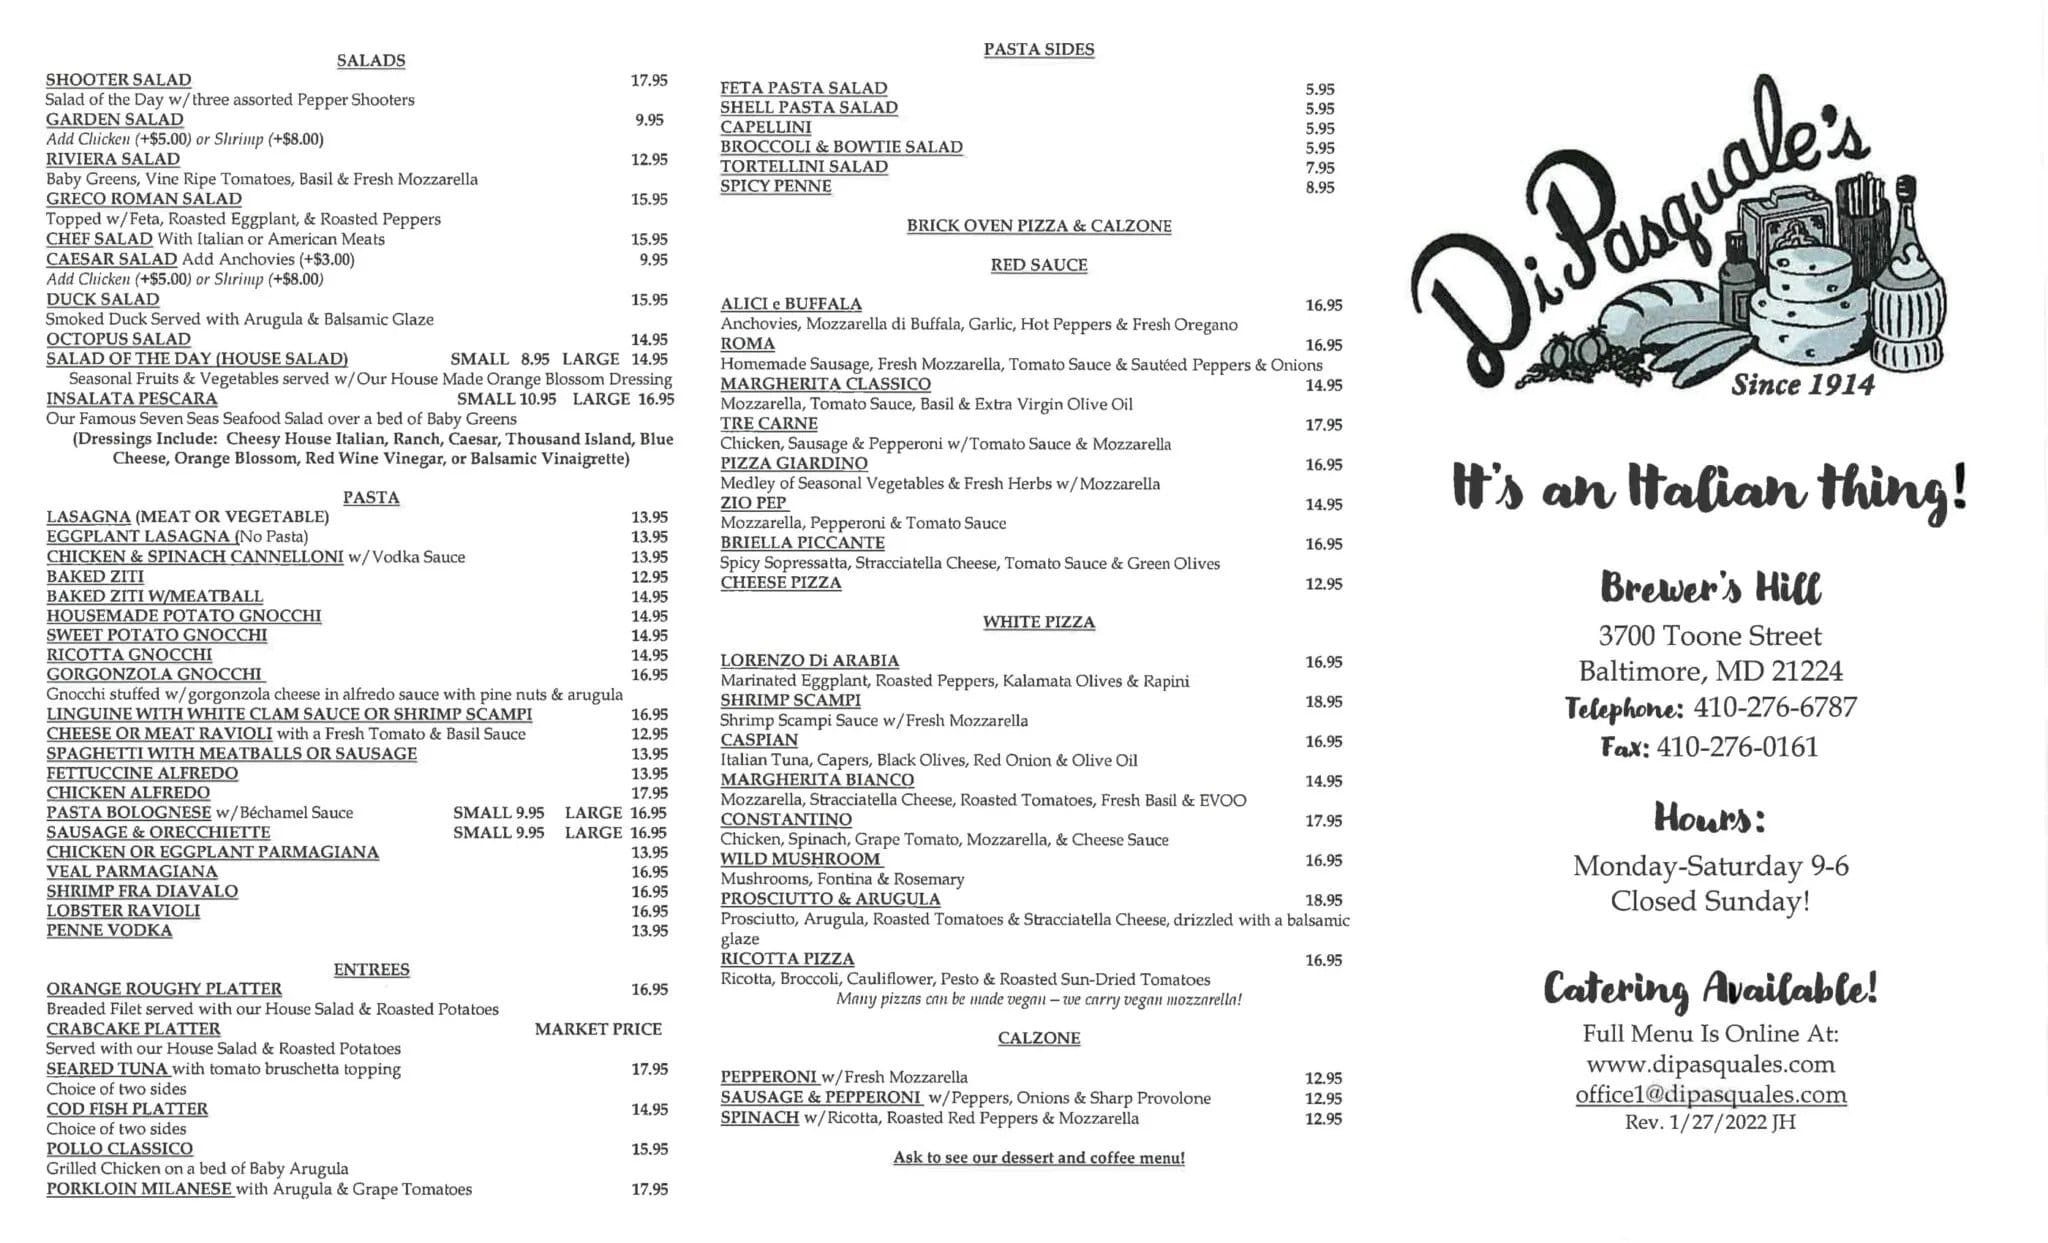 Dipasquale's Brewers Hill Lunch Menu Page 1